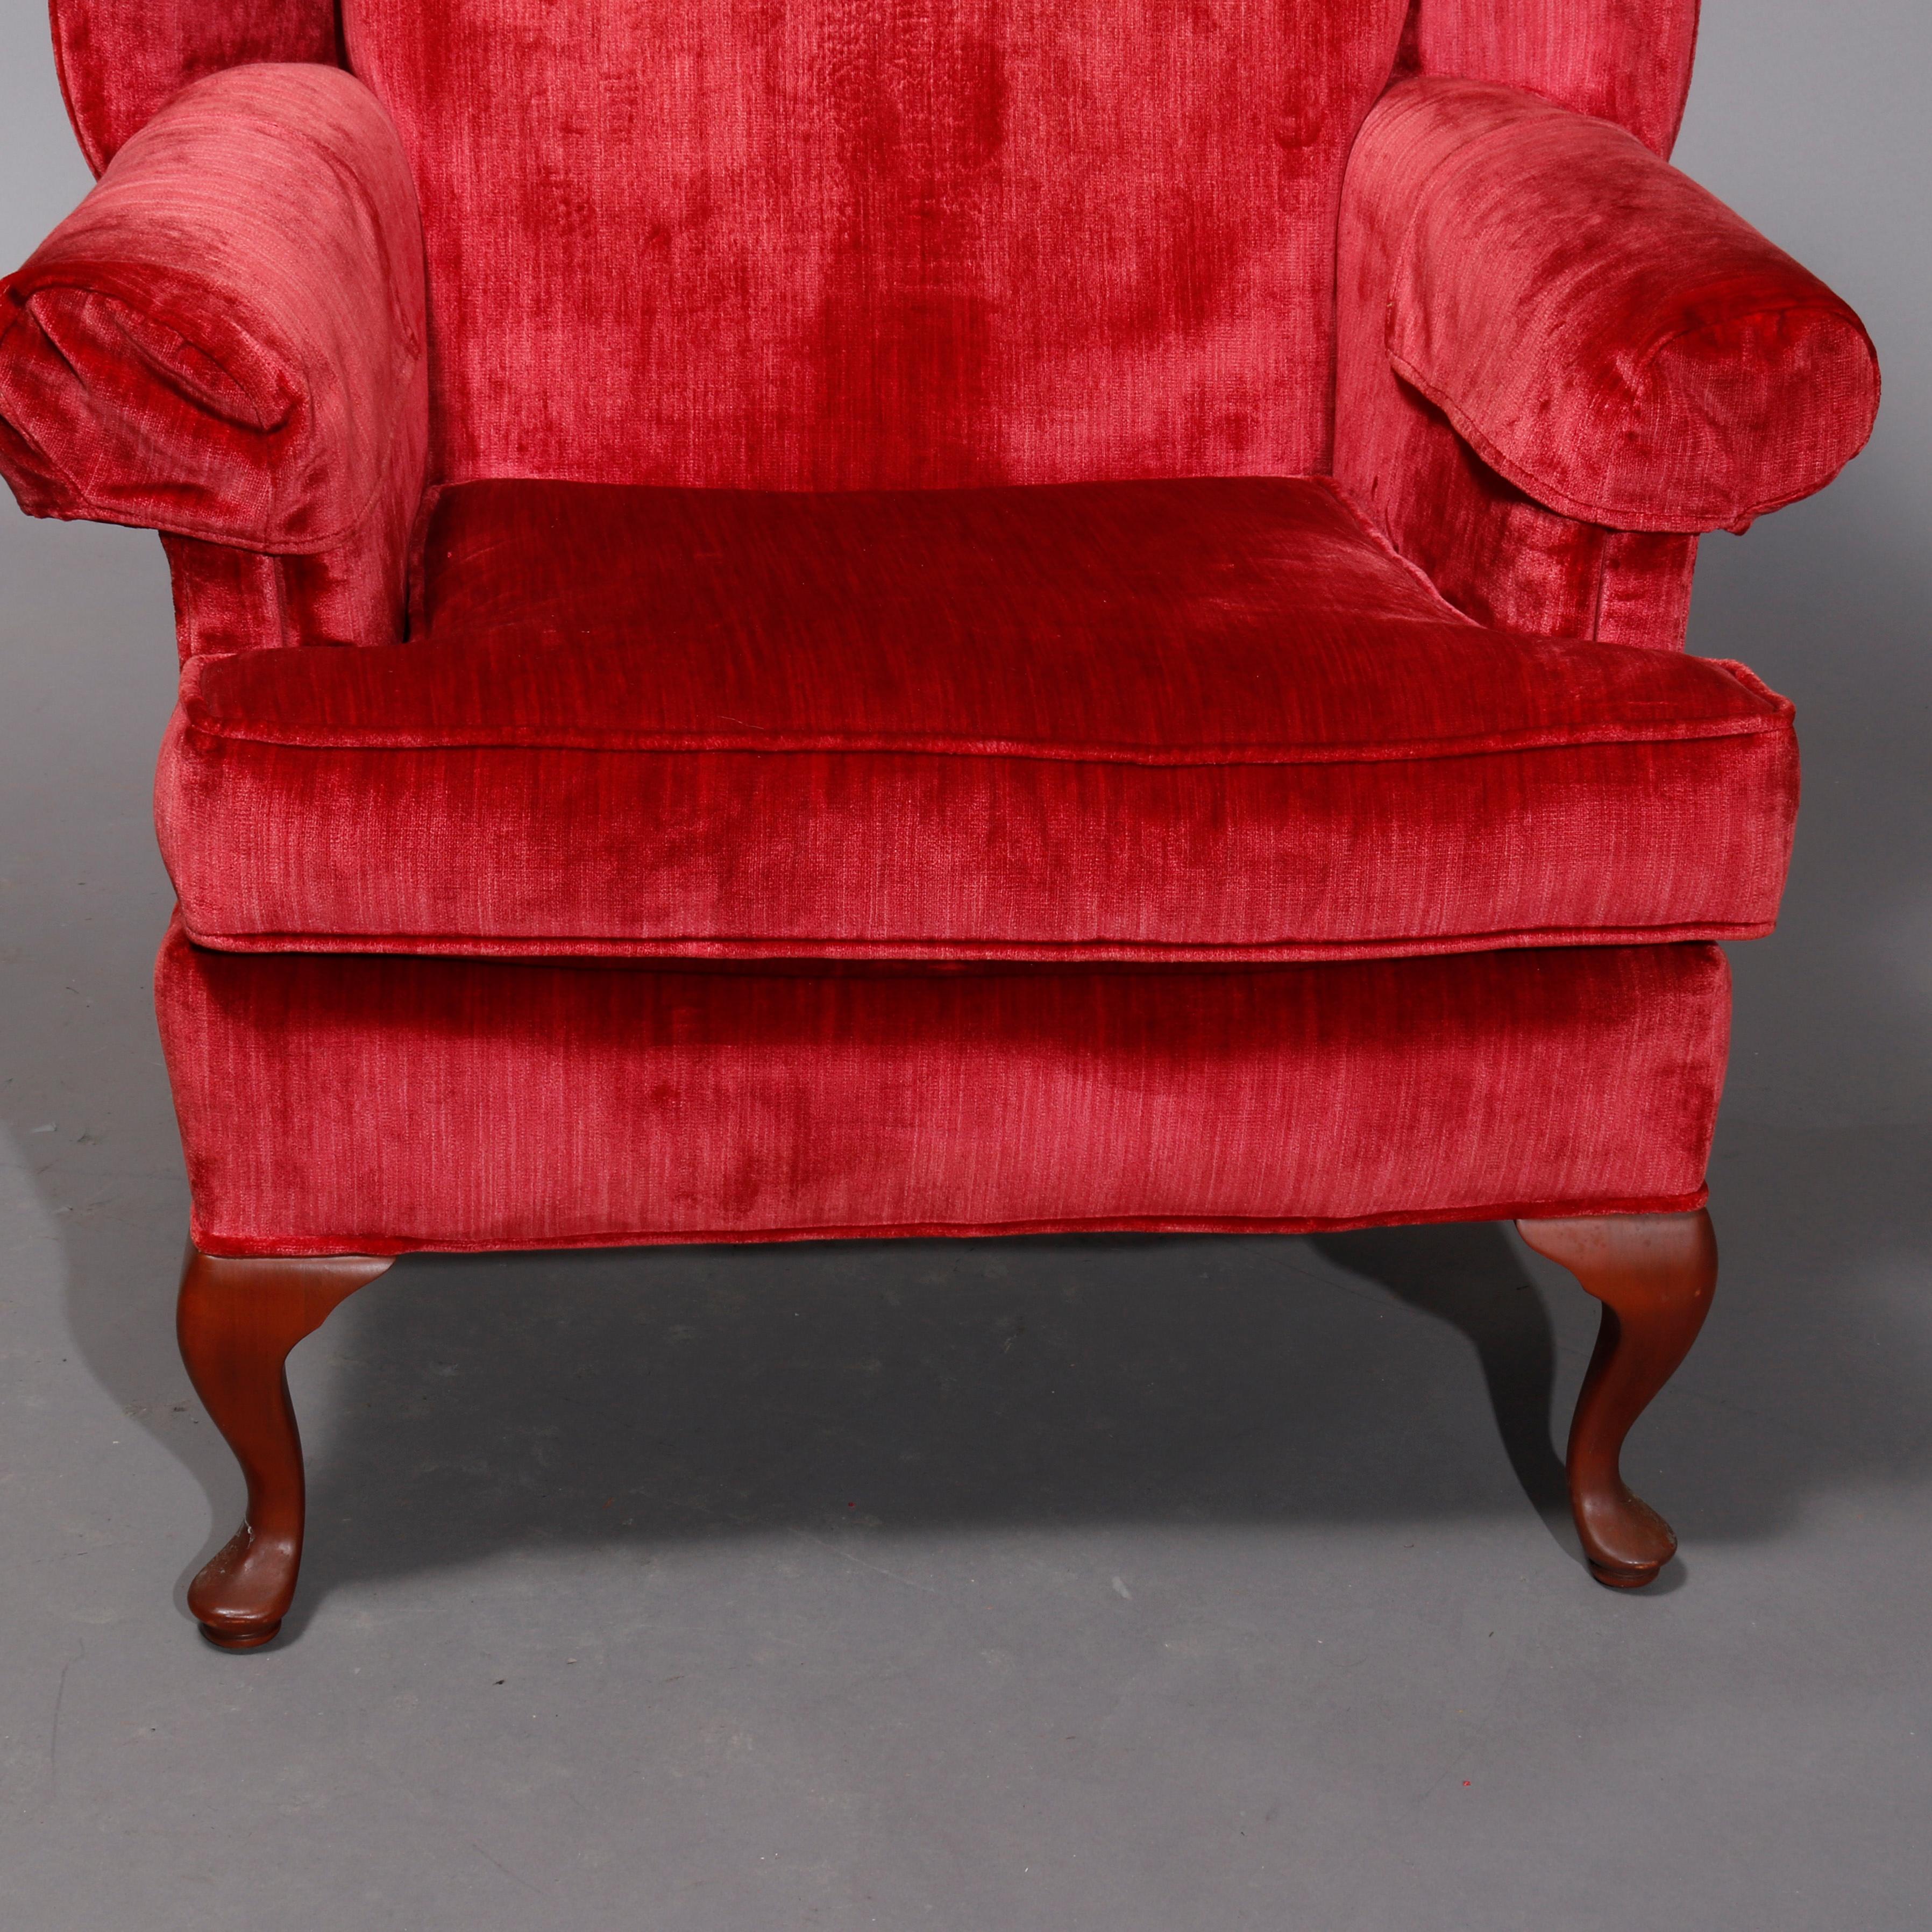 American Pair Red Crushed Velvet & Mahogany Queen Anne Style Fireside Chairs, 20thC